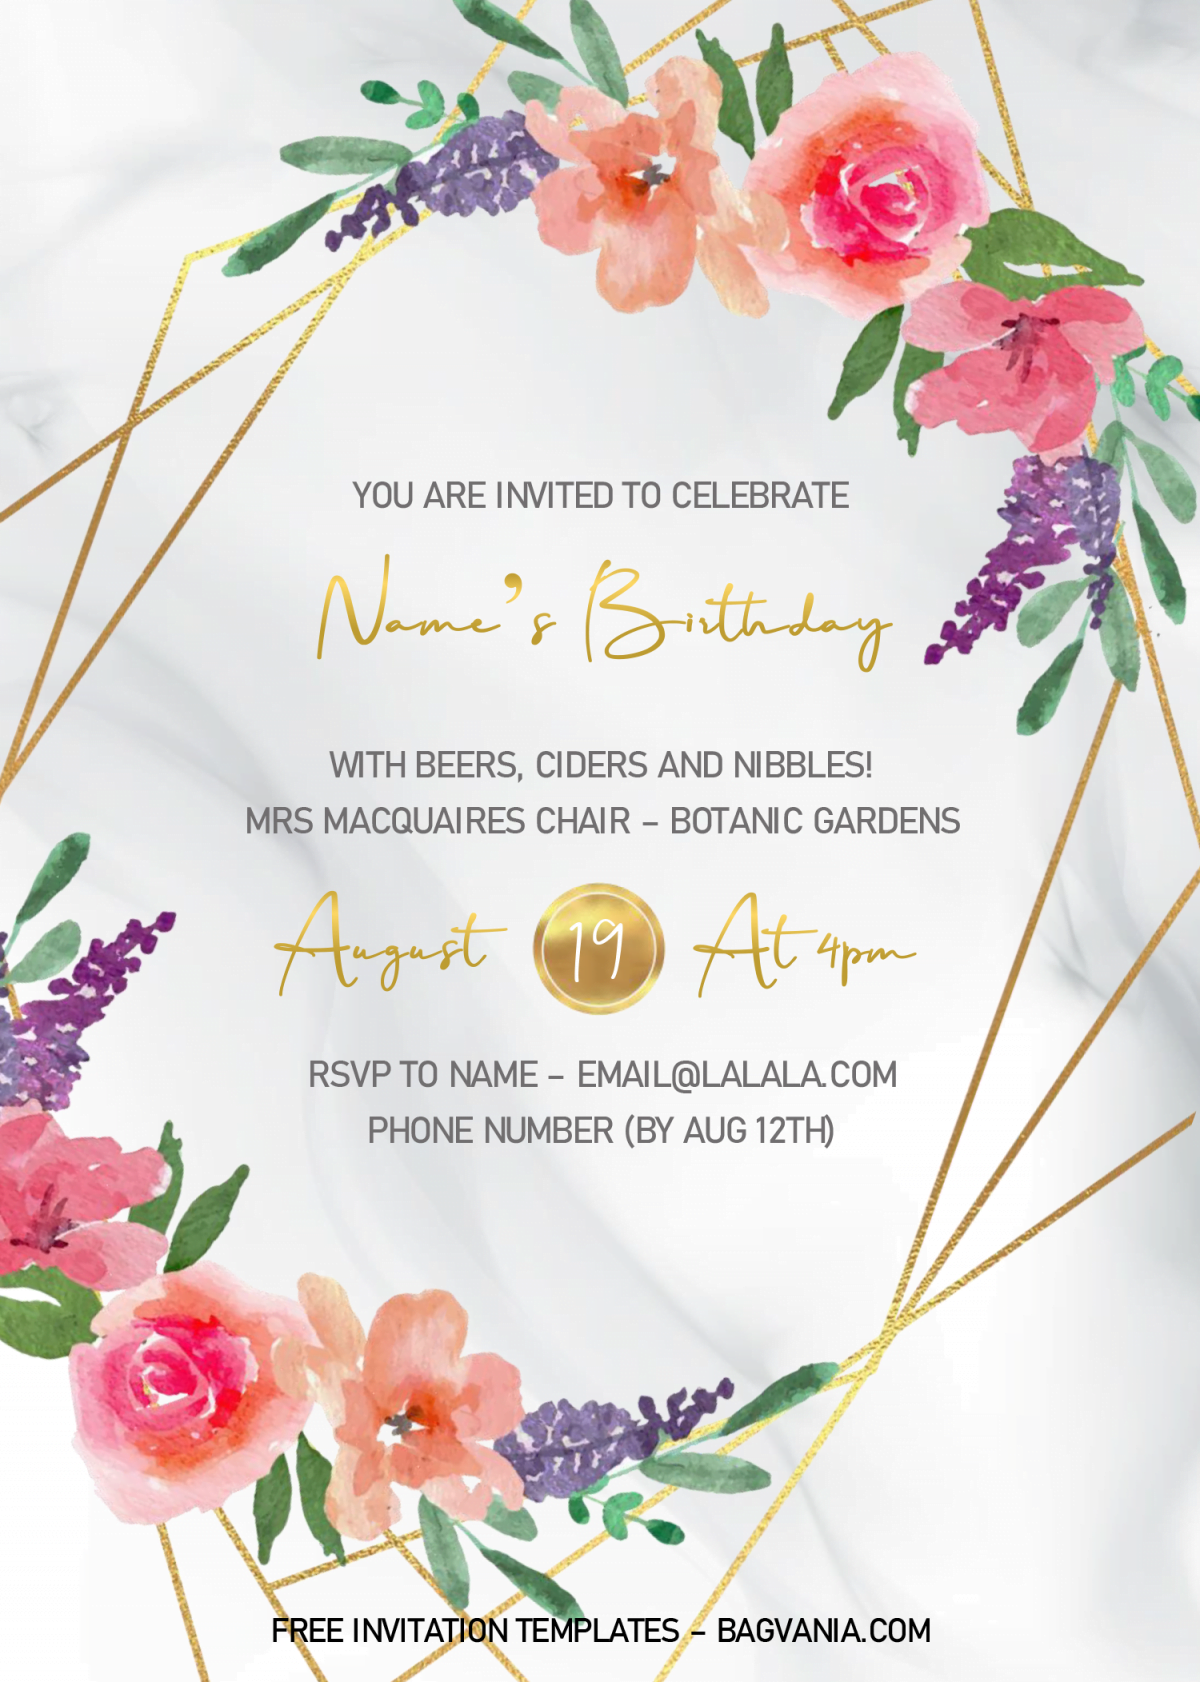 Gold Geometric Invitation Templates - Editable .Docx and has white marble background